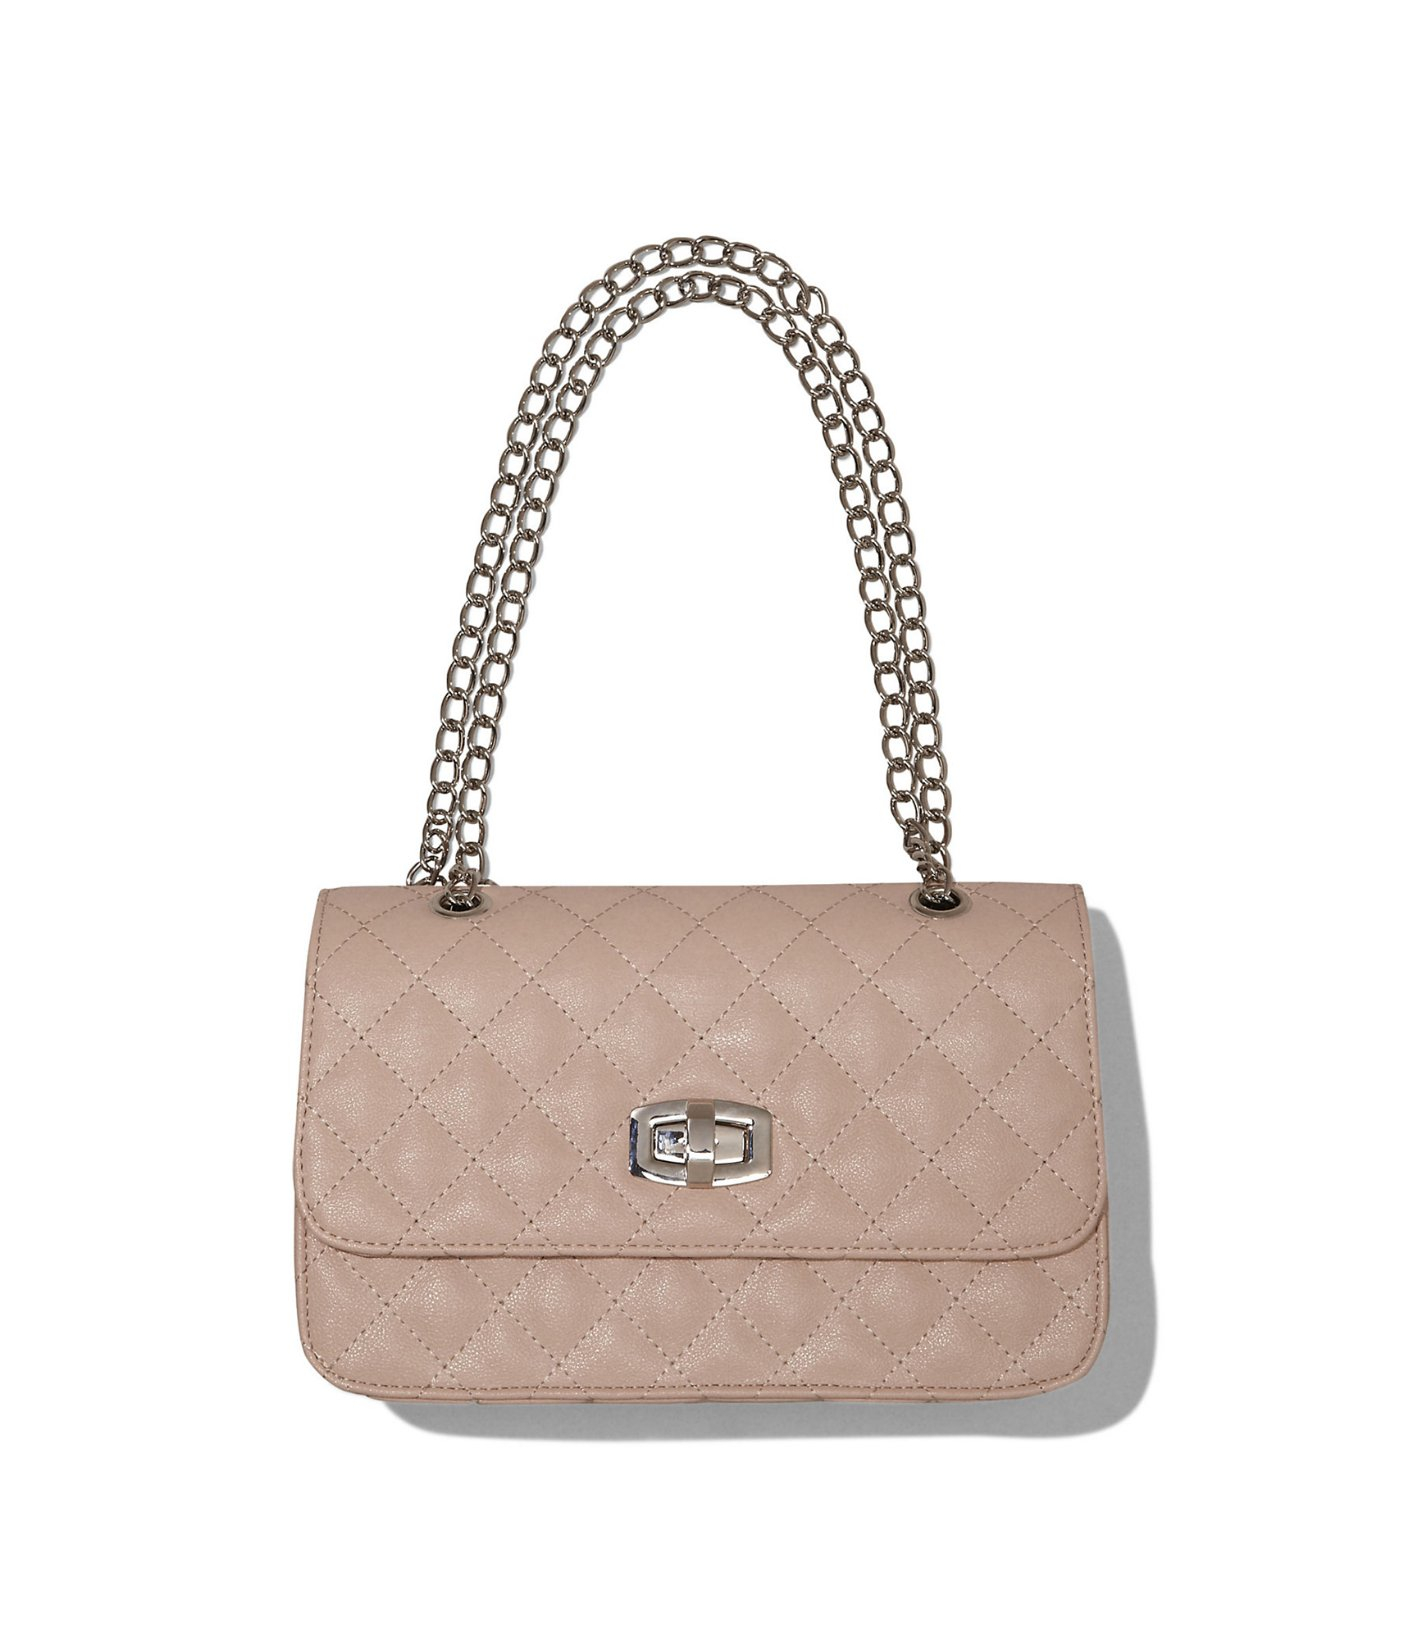 Lyst - Express Quilted Chain Strap Shoulder Bag in Natural